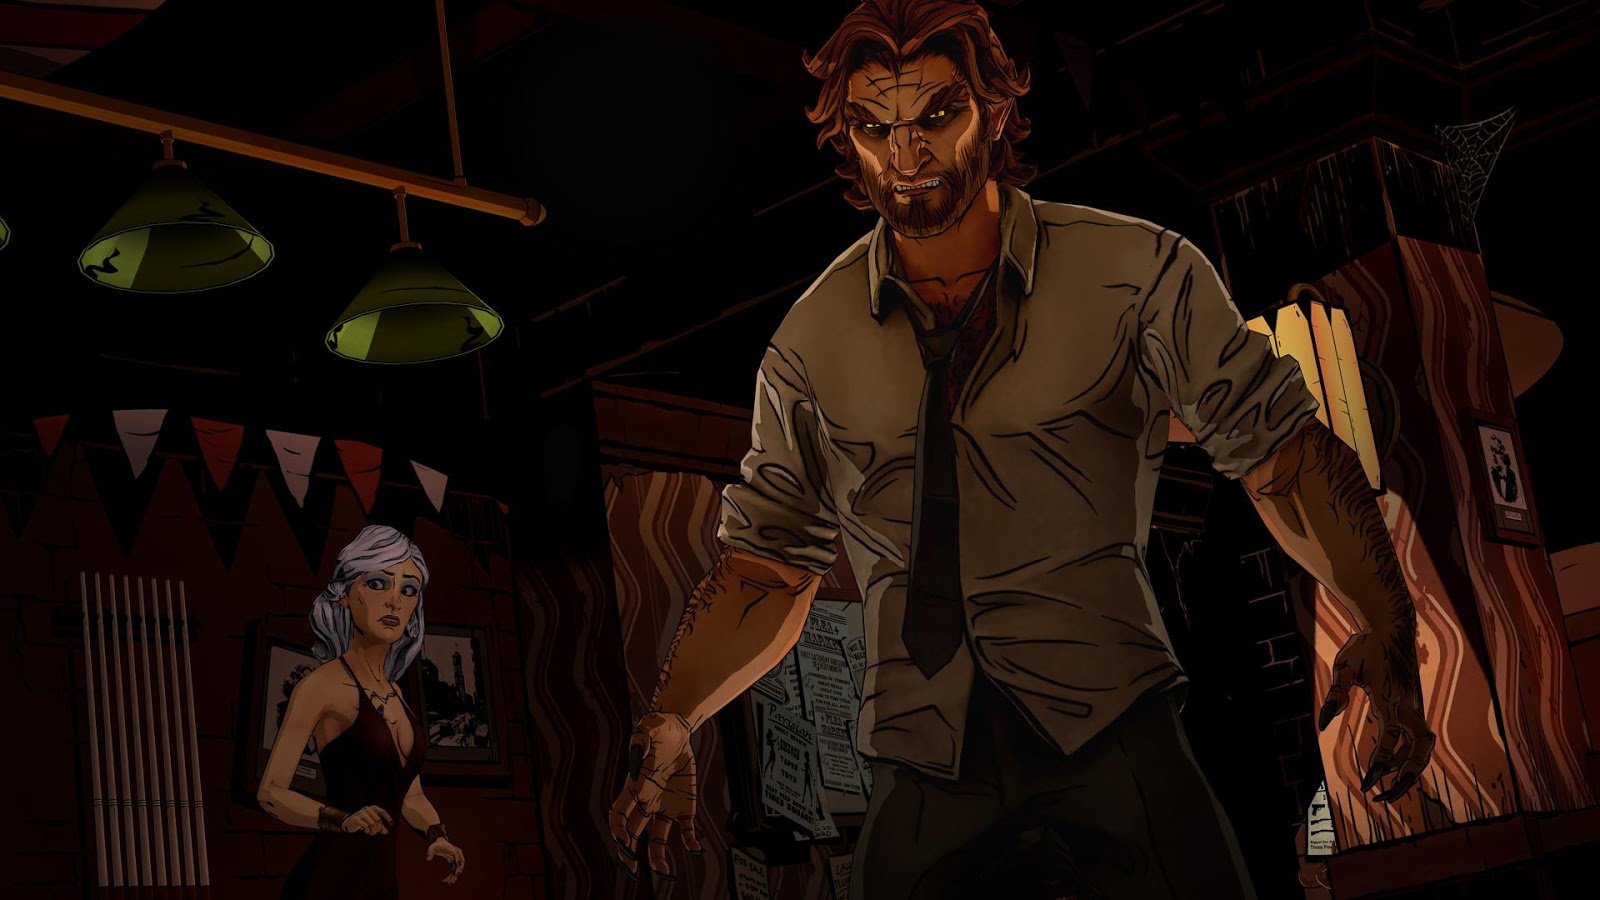 High Resolution Wallpaper | The Wolf Among Us 1600x900 px